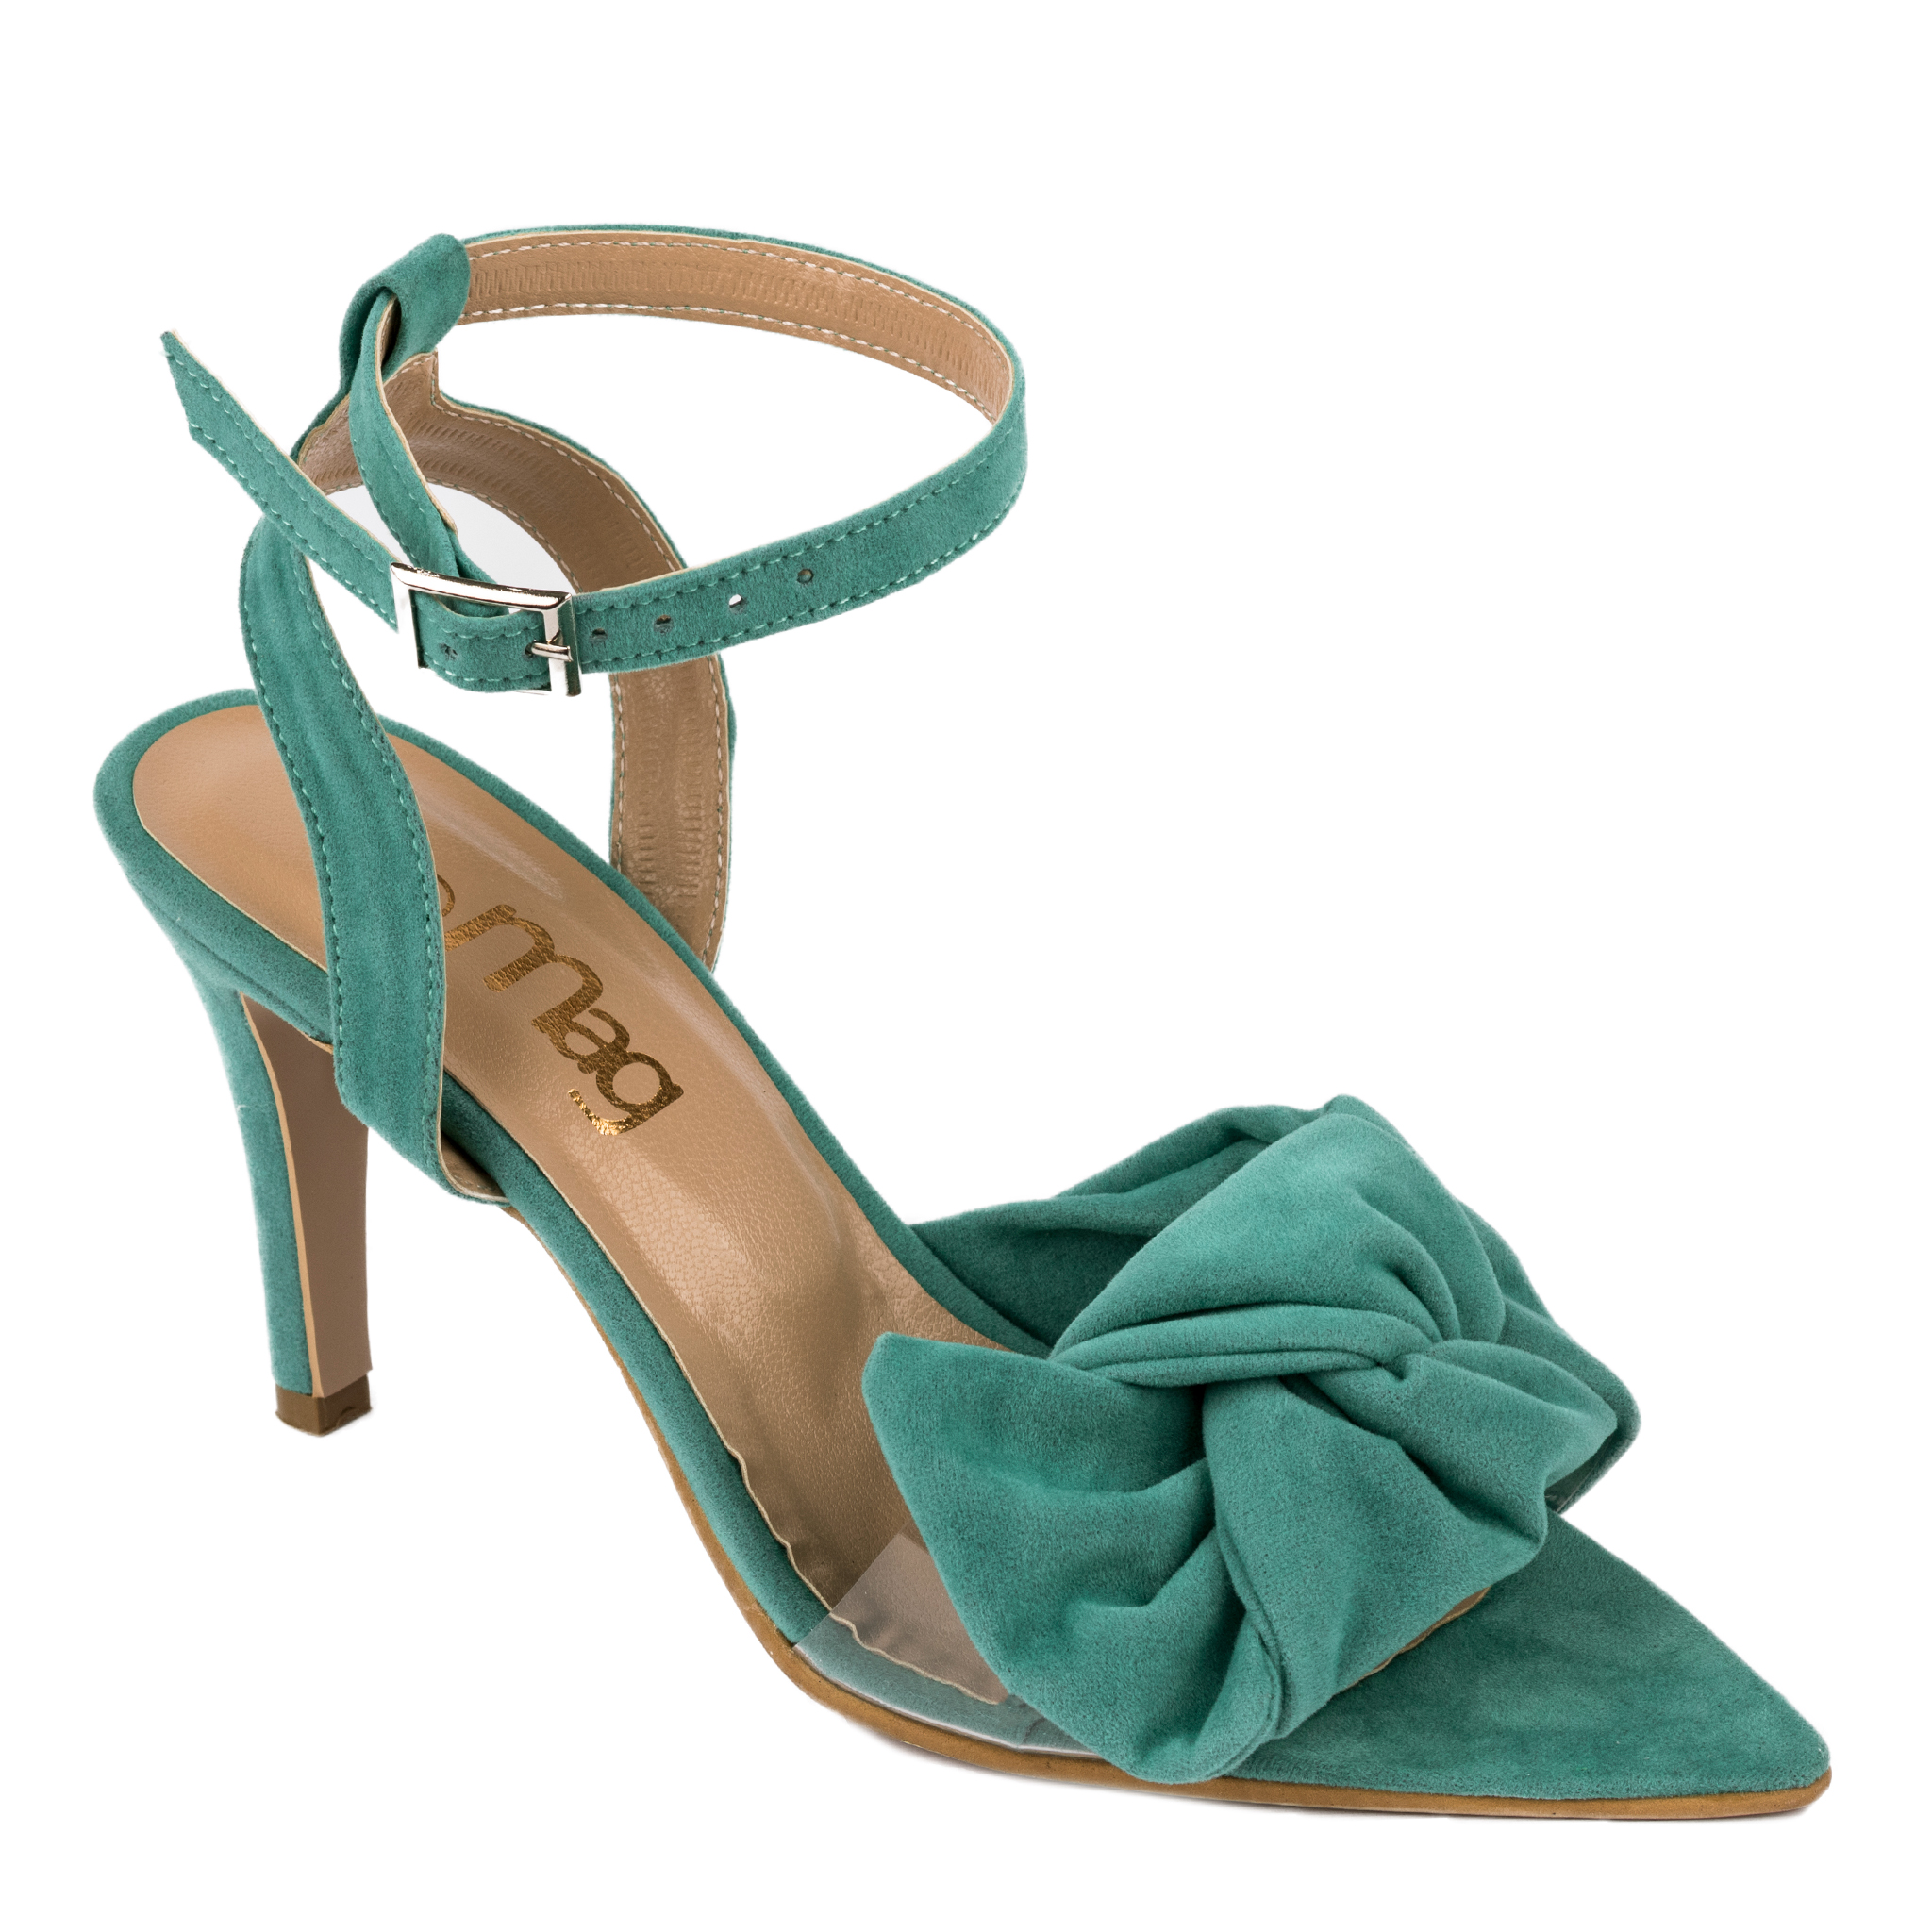 VELOUR SPIKE SANDALS THIN HEEL WITH BOW - MINT